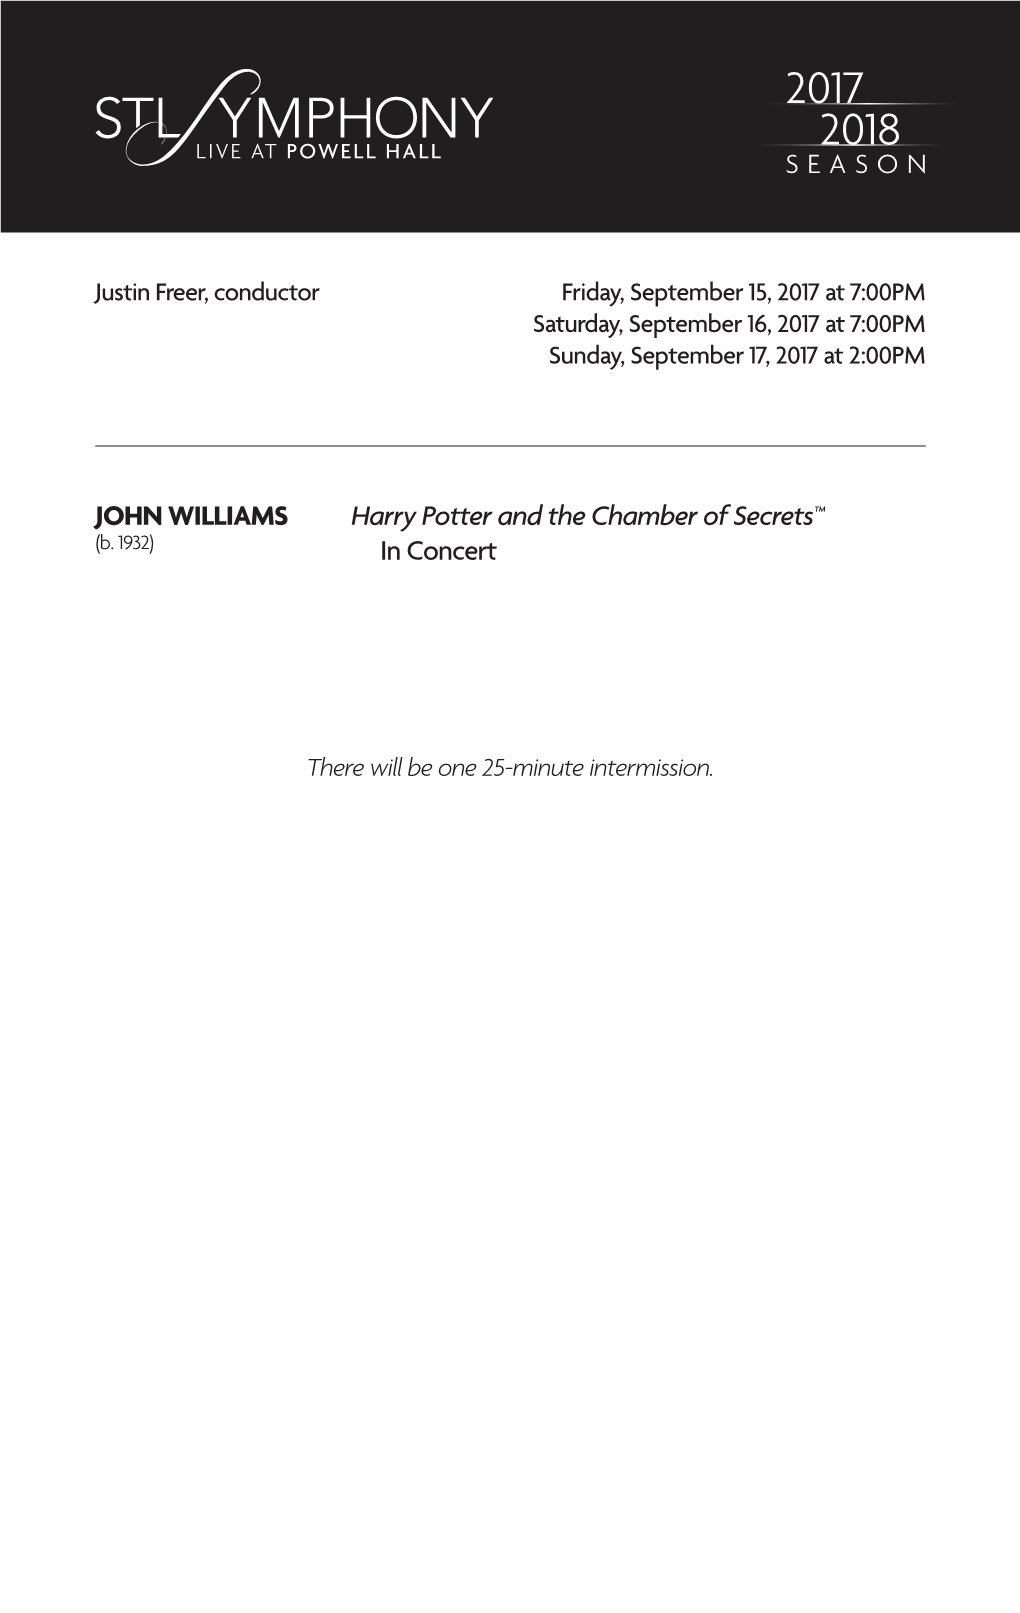 SEASON JOHN WILLIAMS Harry Potter and the Chamber of Secrets™ in Concert